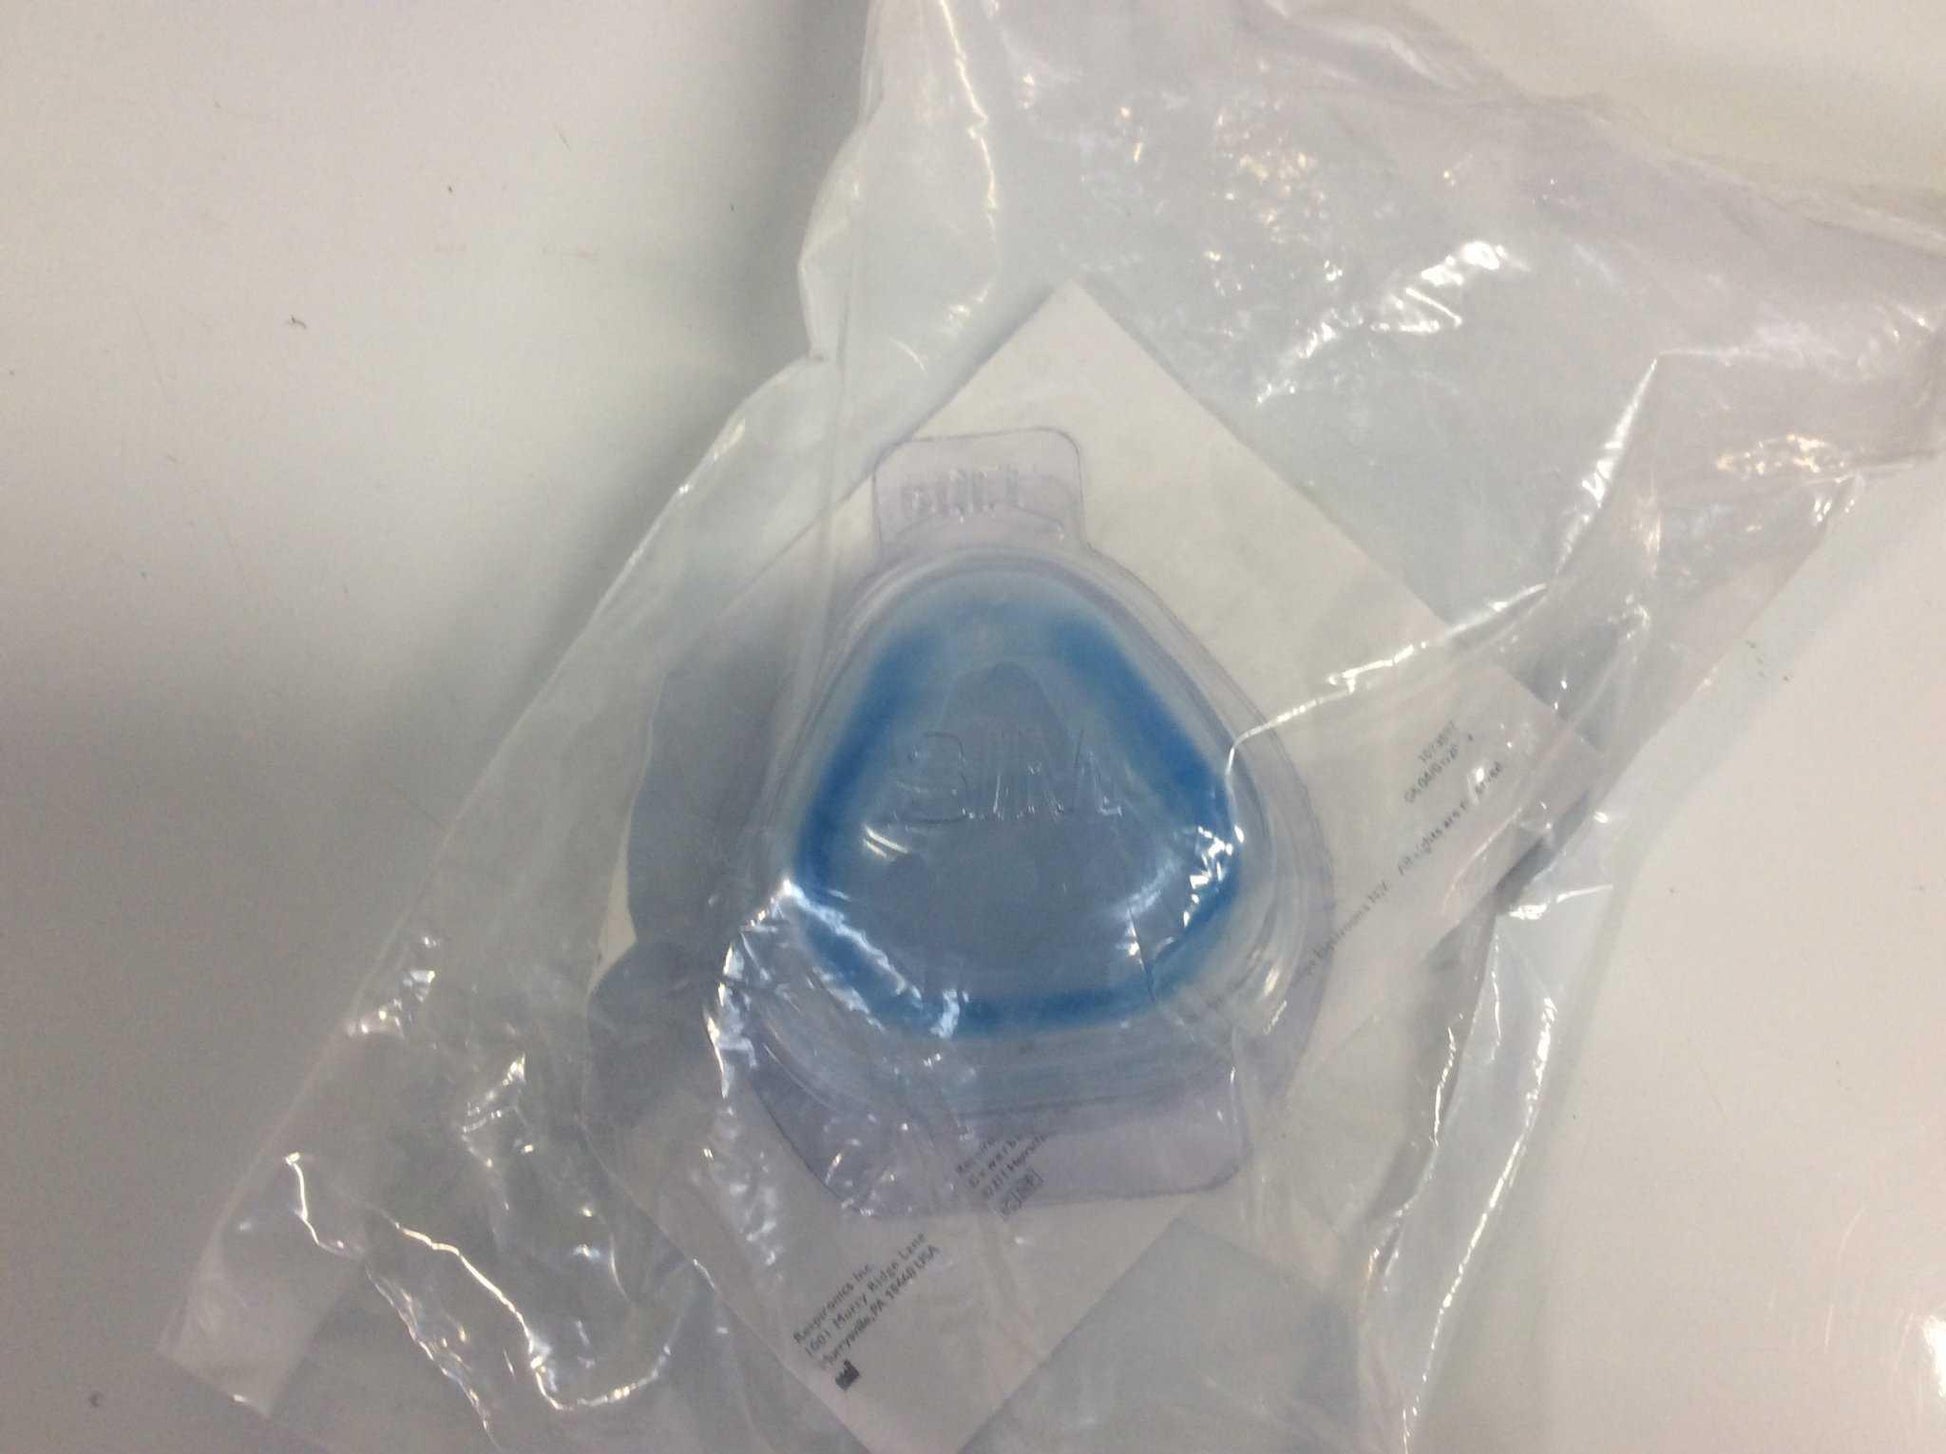 NEW Philips Respironics Small ComfortGel Blue Flap and Gel Cushion 1070107 FREE Shipping - MBR Medicals